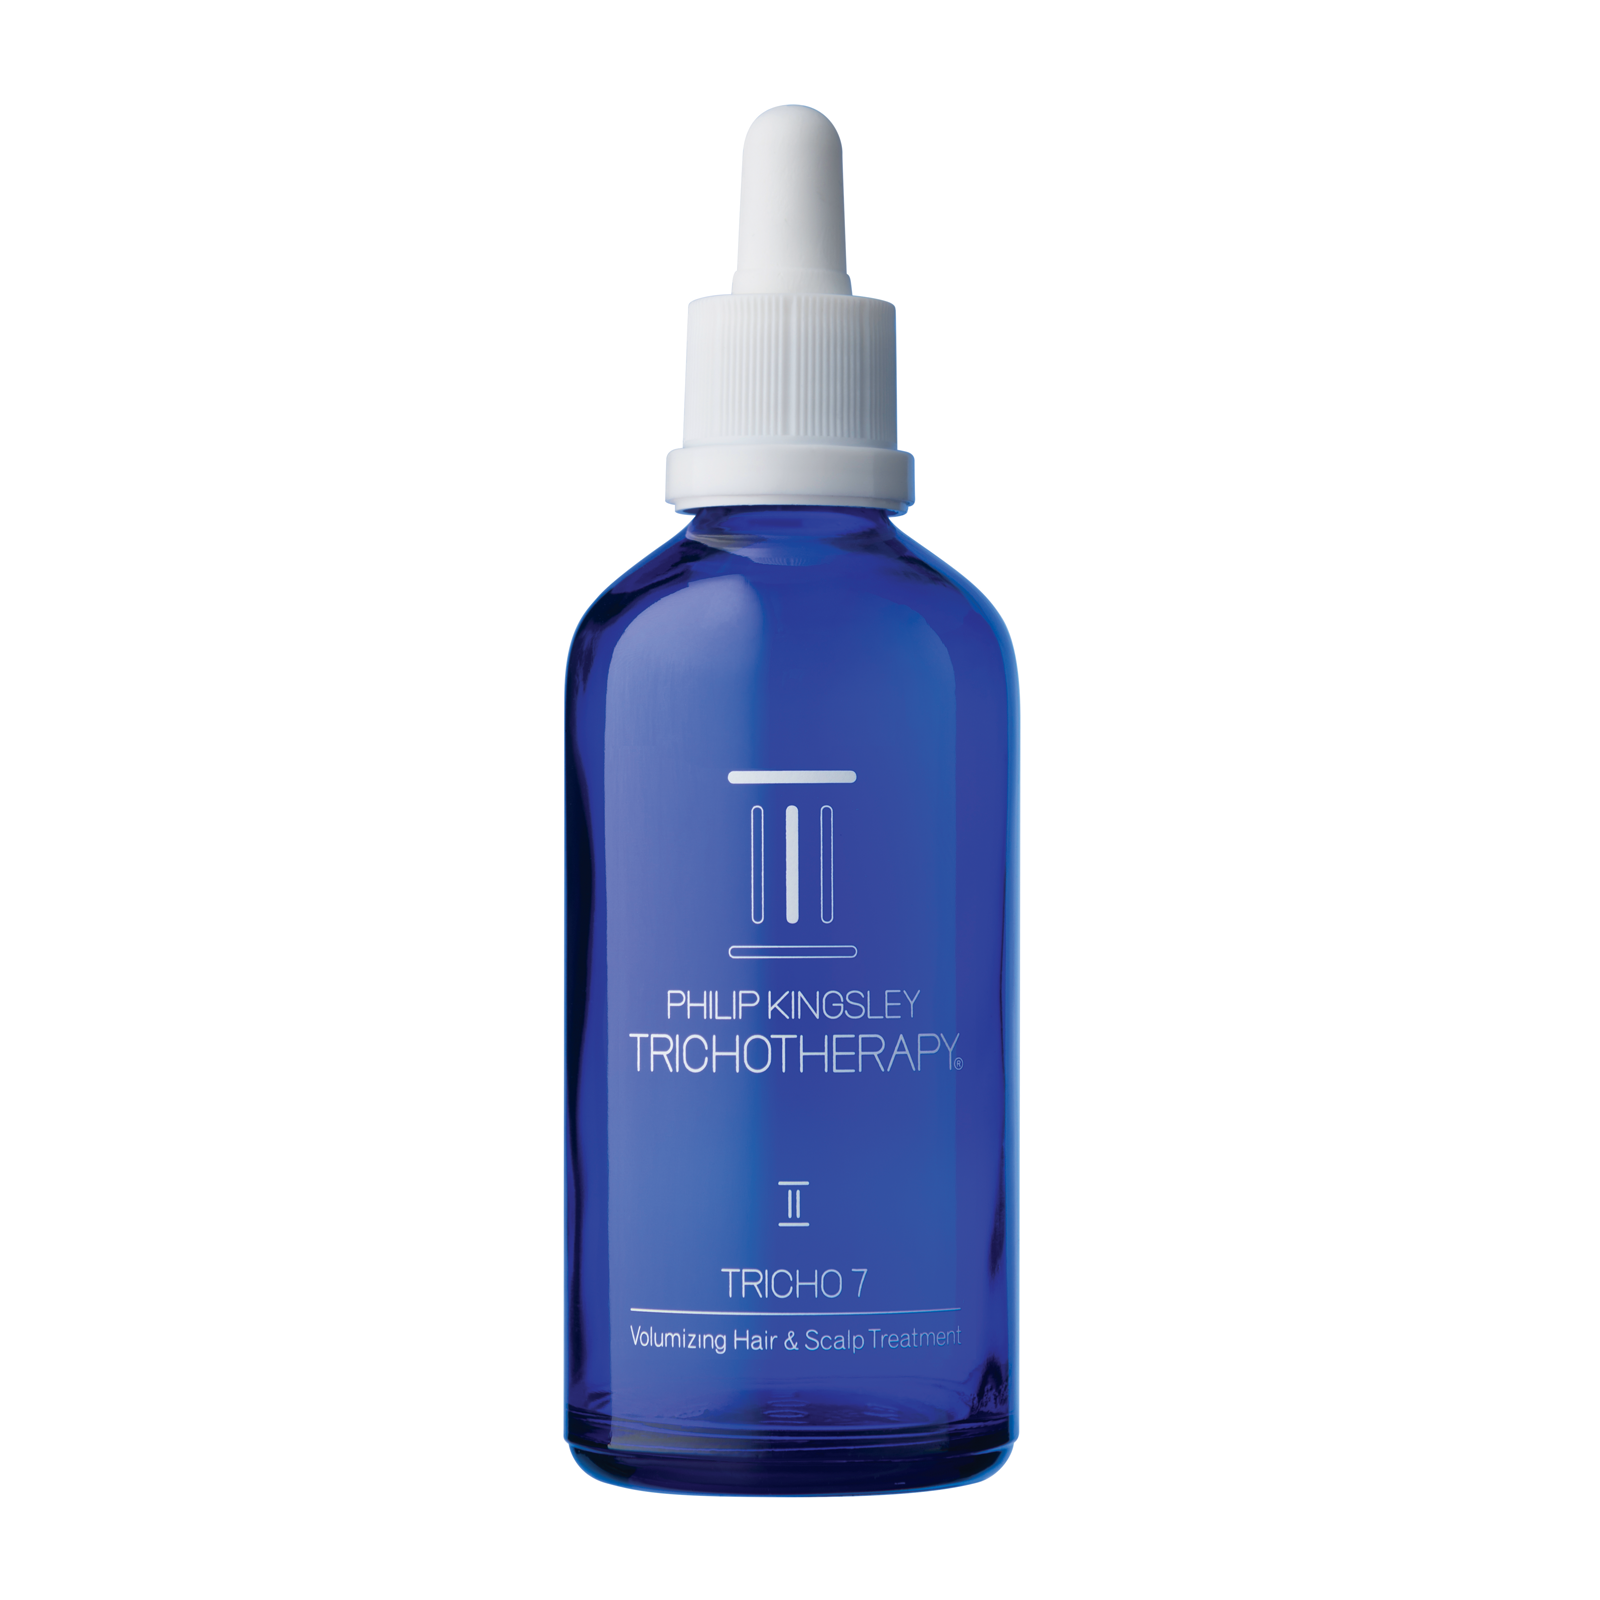 Philip Kingsley Trichotherapy Tricho 7 Volumizing Hair and Scalp Treatment